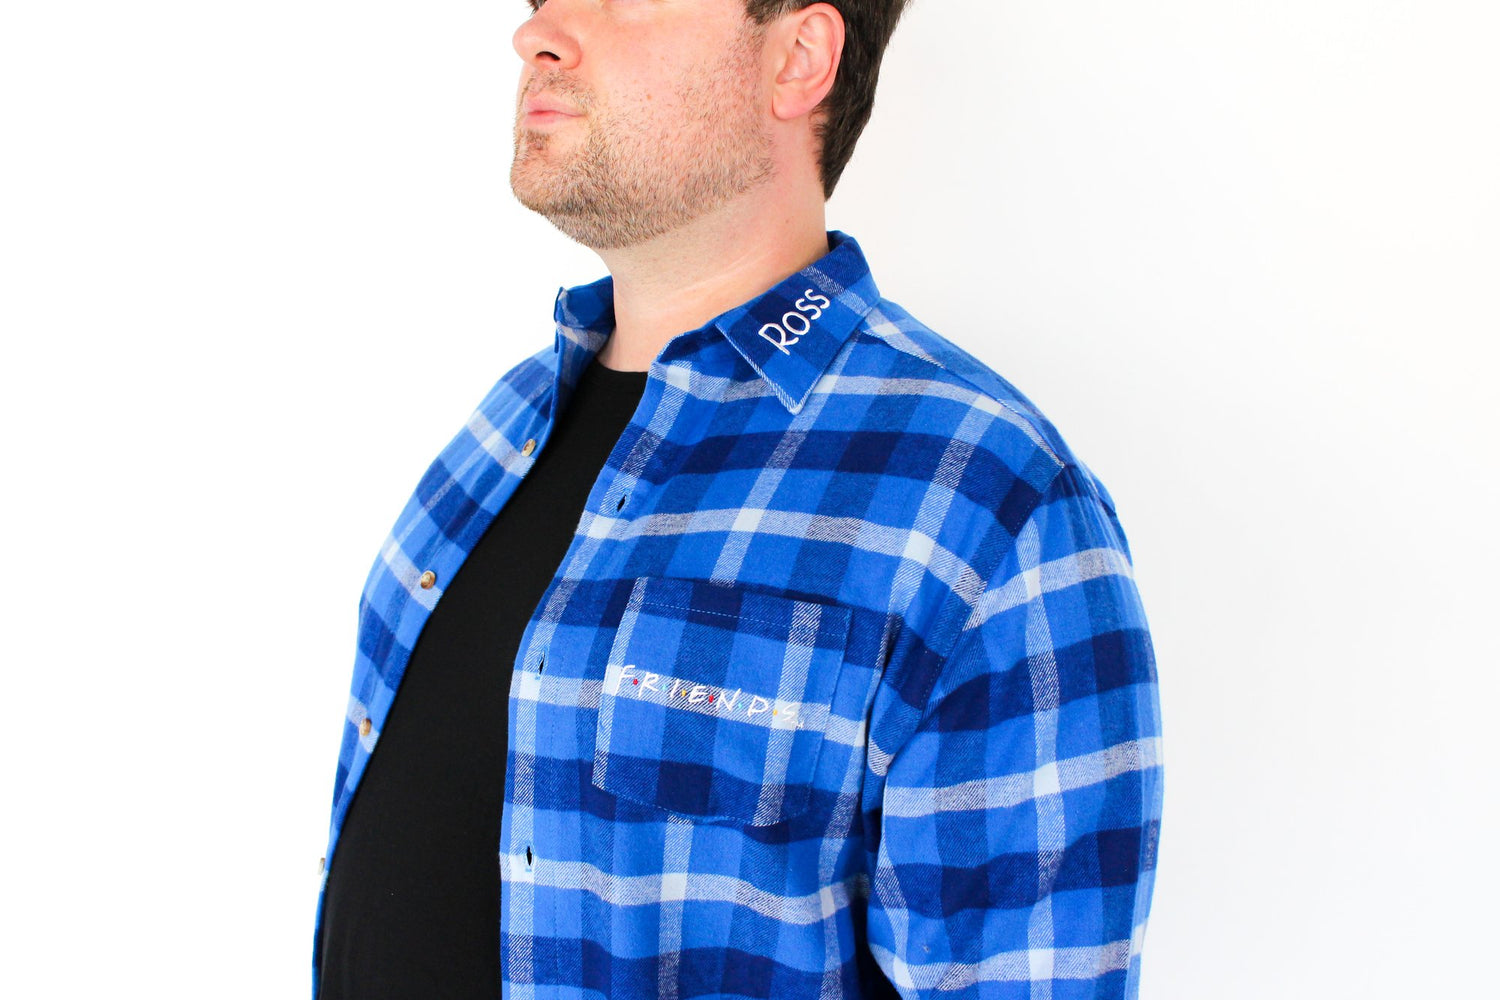 Ross Pivot Flannel by Cakeworthy - Happy Mile Style